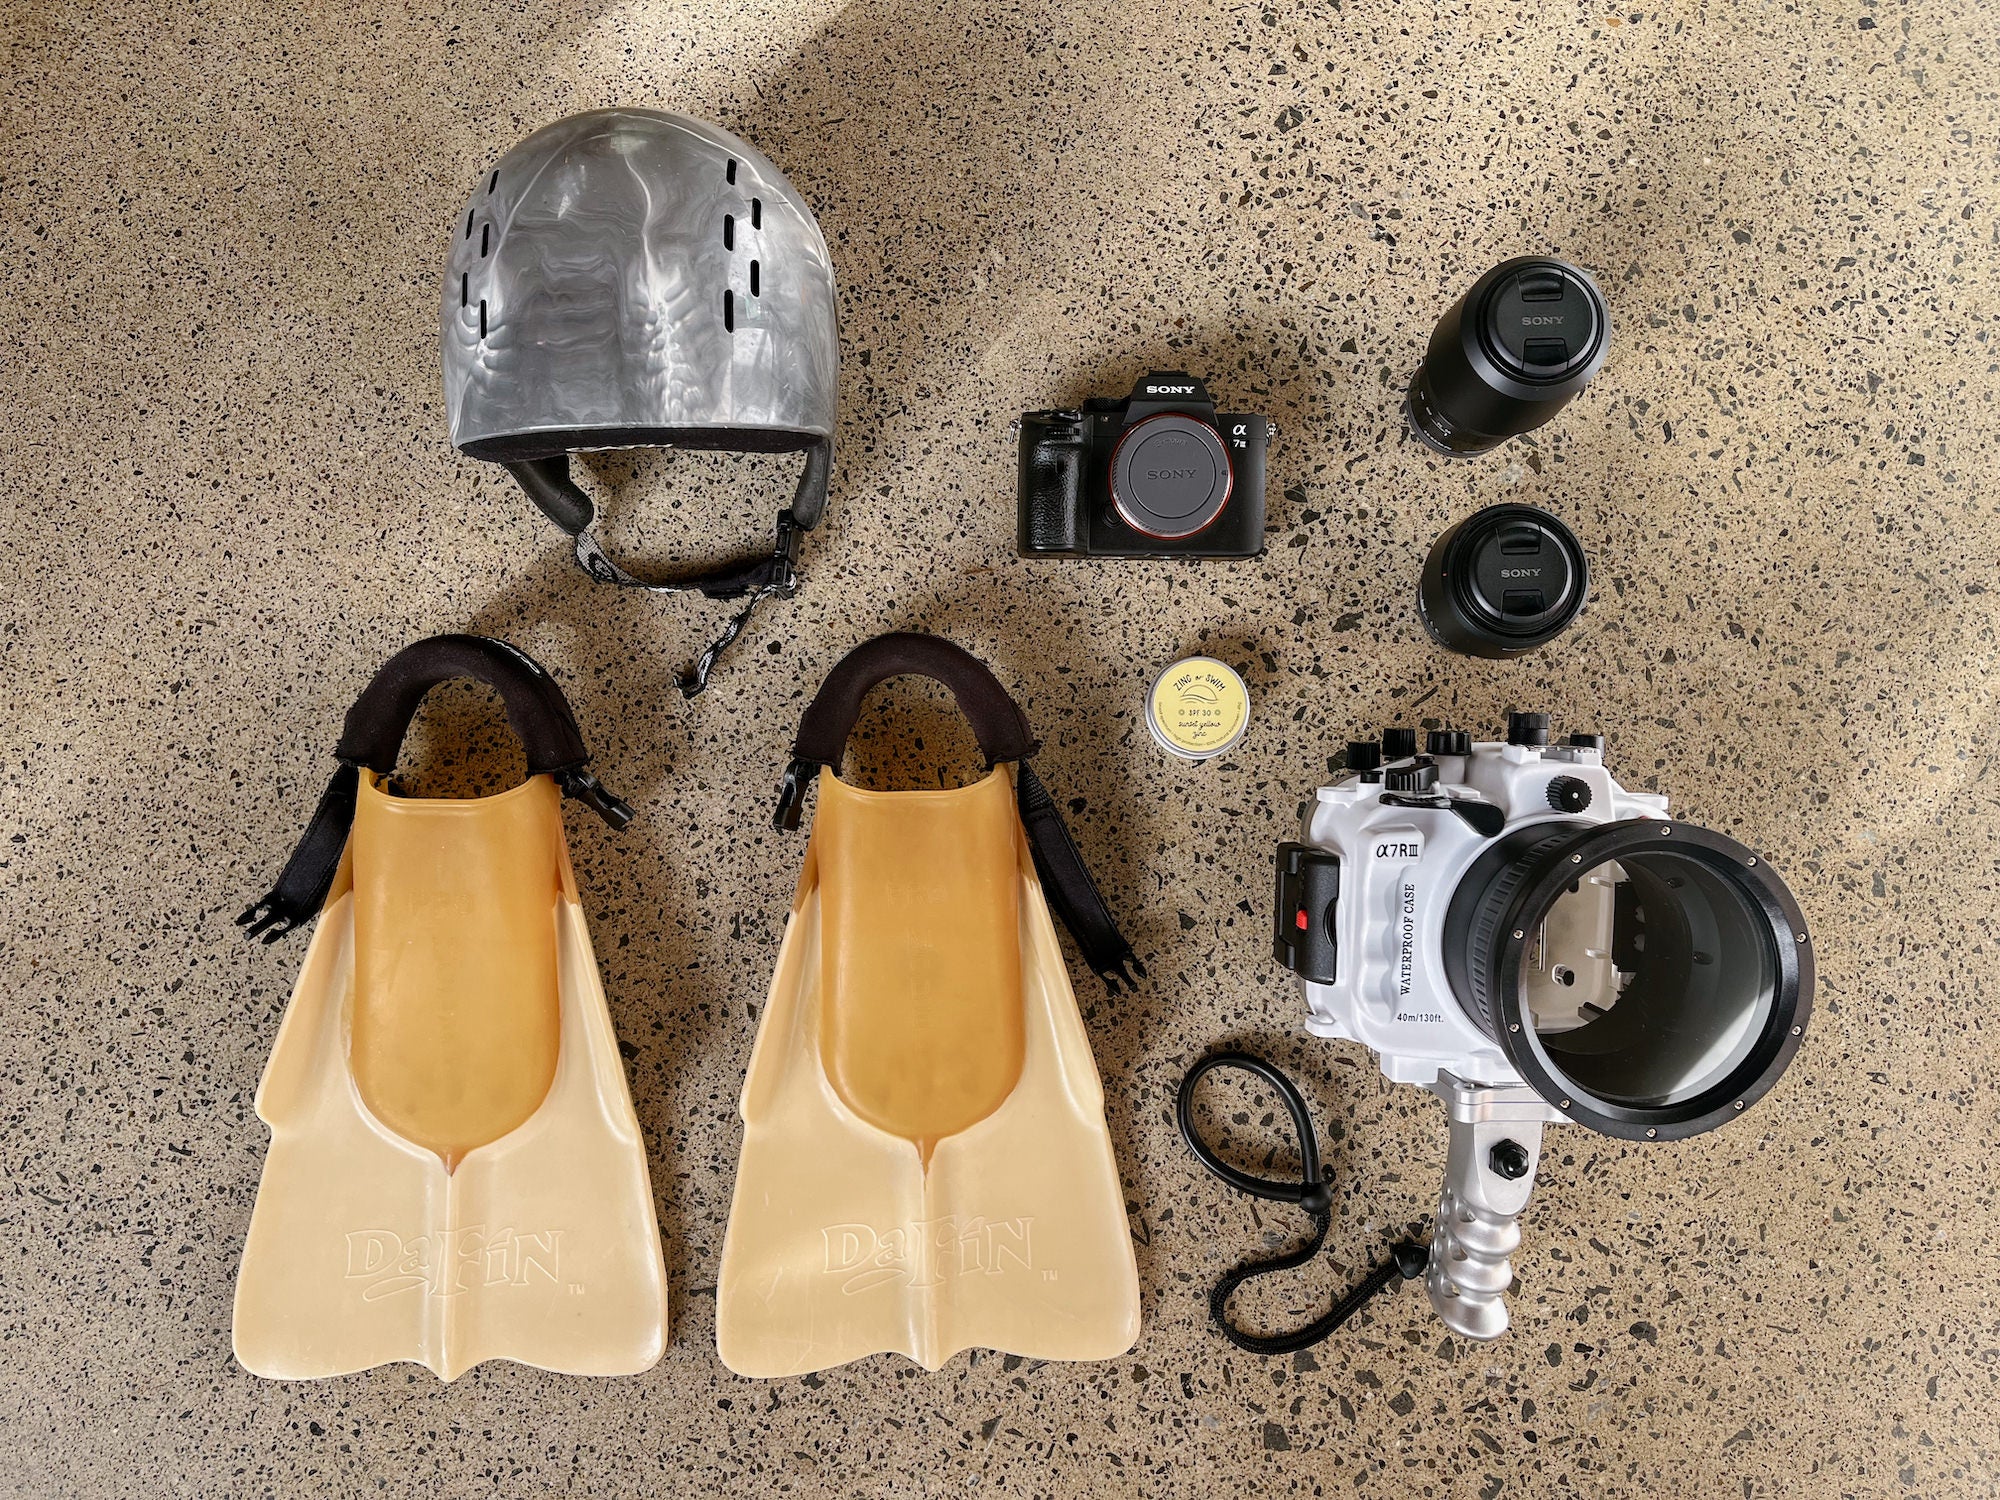 Leonie Anholts' kit for surf photographer and videography